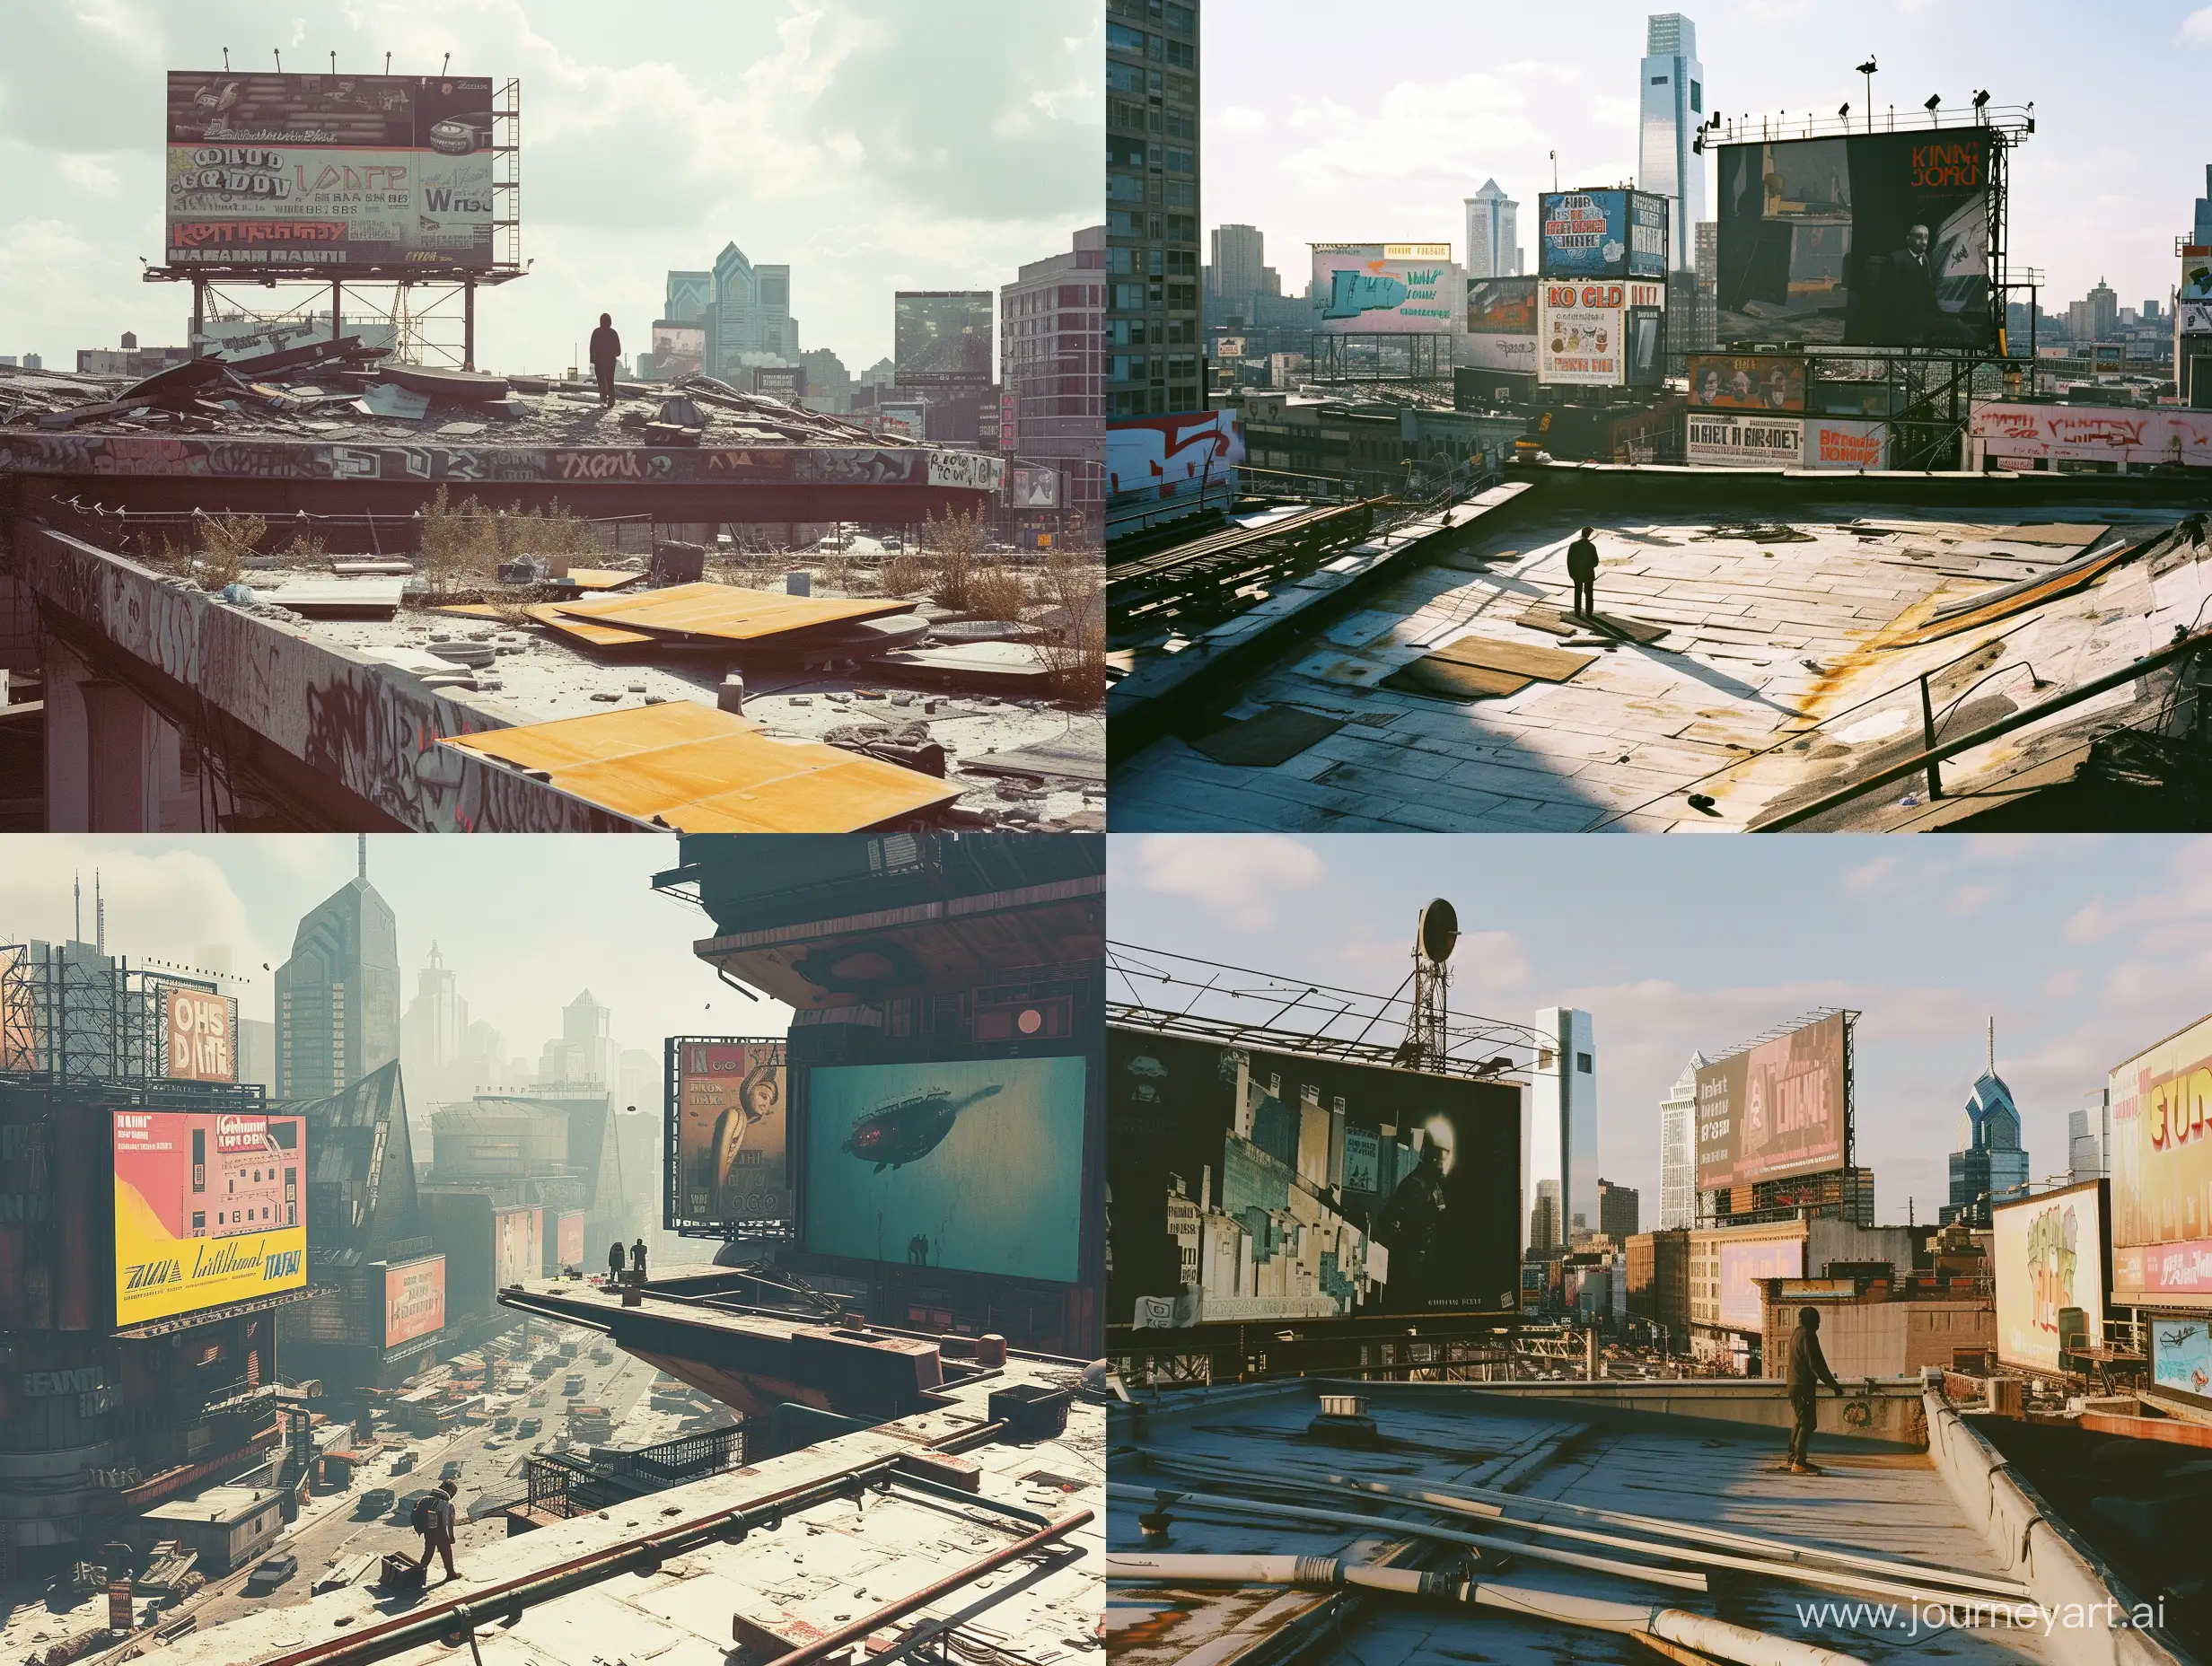 A photo of a sci fi Philadelphia City taken with Kodak Gold 200 film, capturing the natural lighting and busy city environment. The style is raw and the view is full view, with billboards in the background, a man is seen standing on the roof, architectures